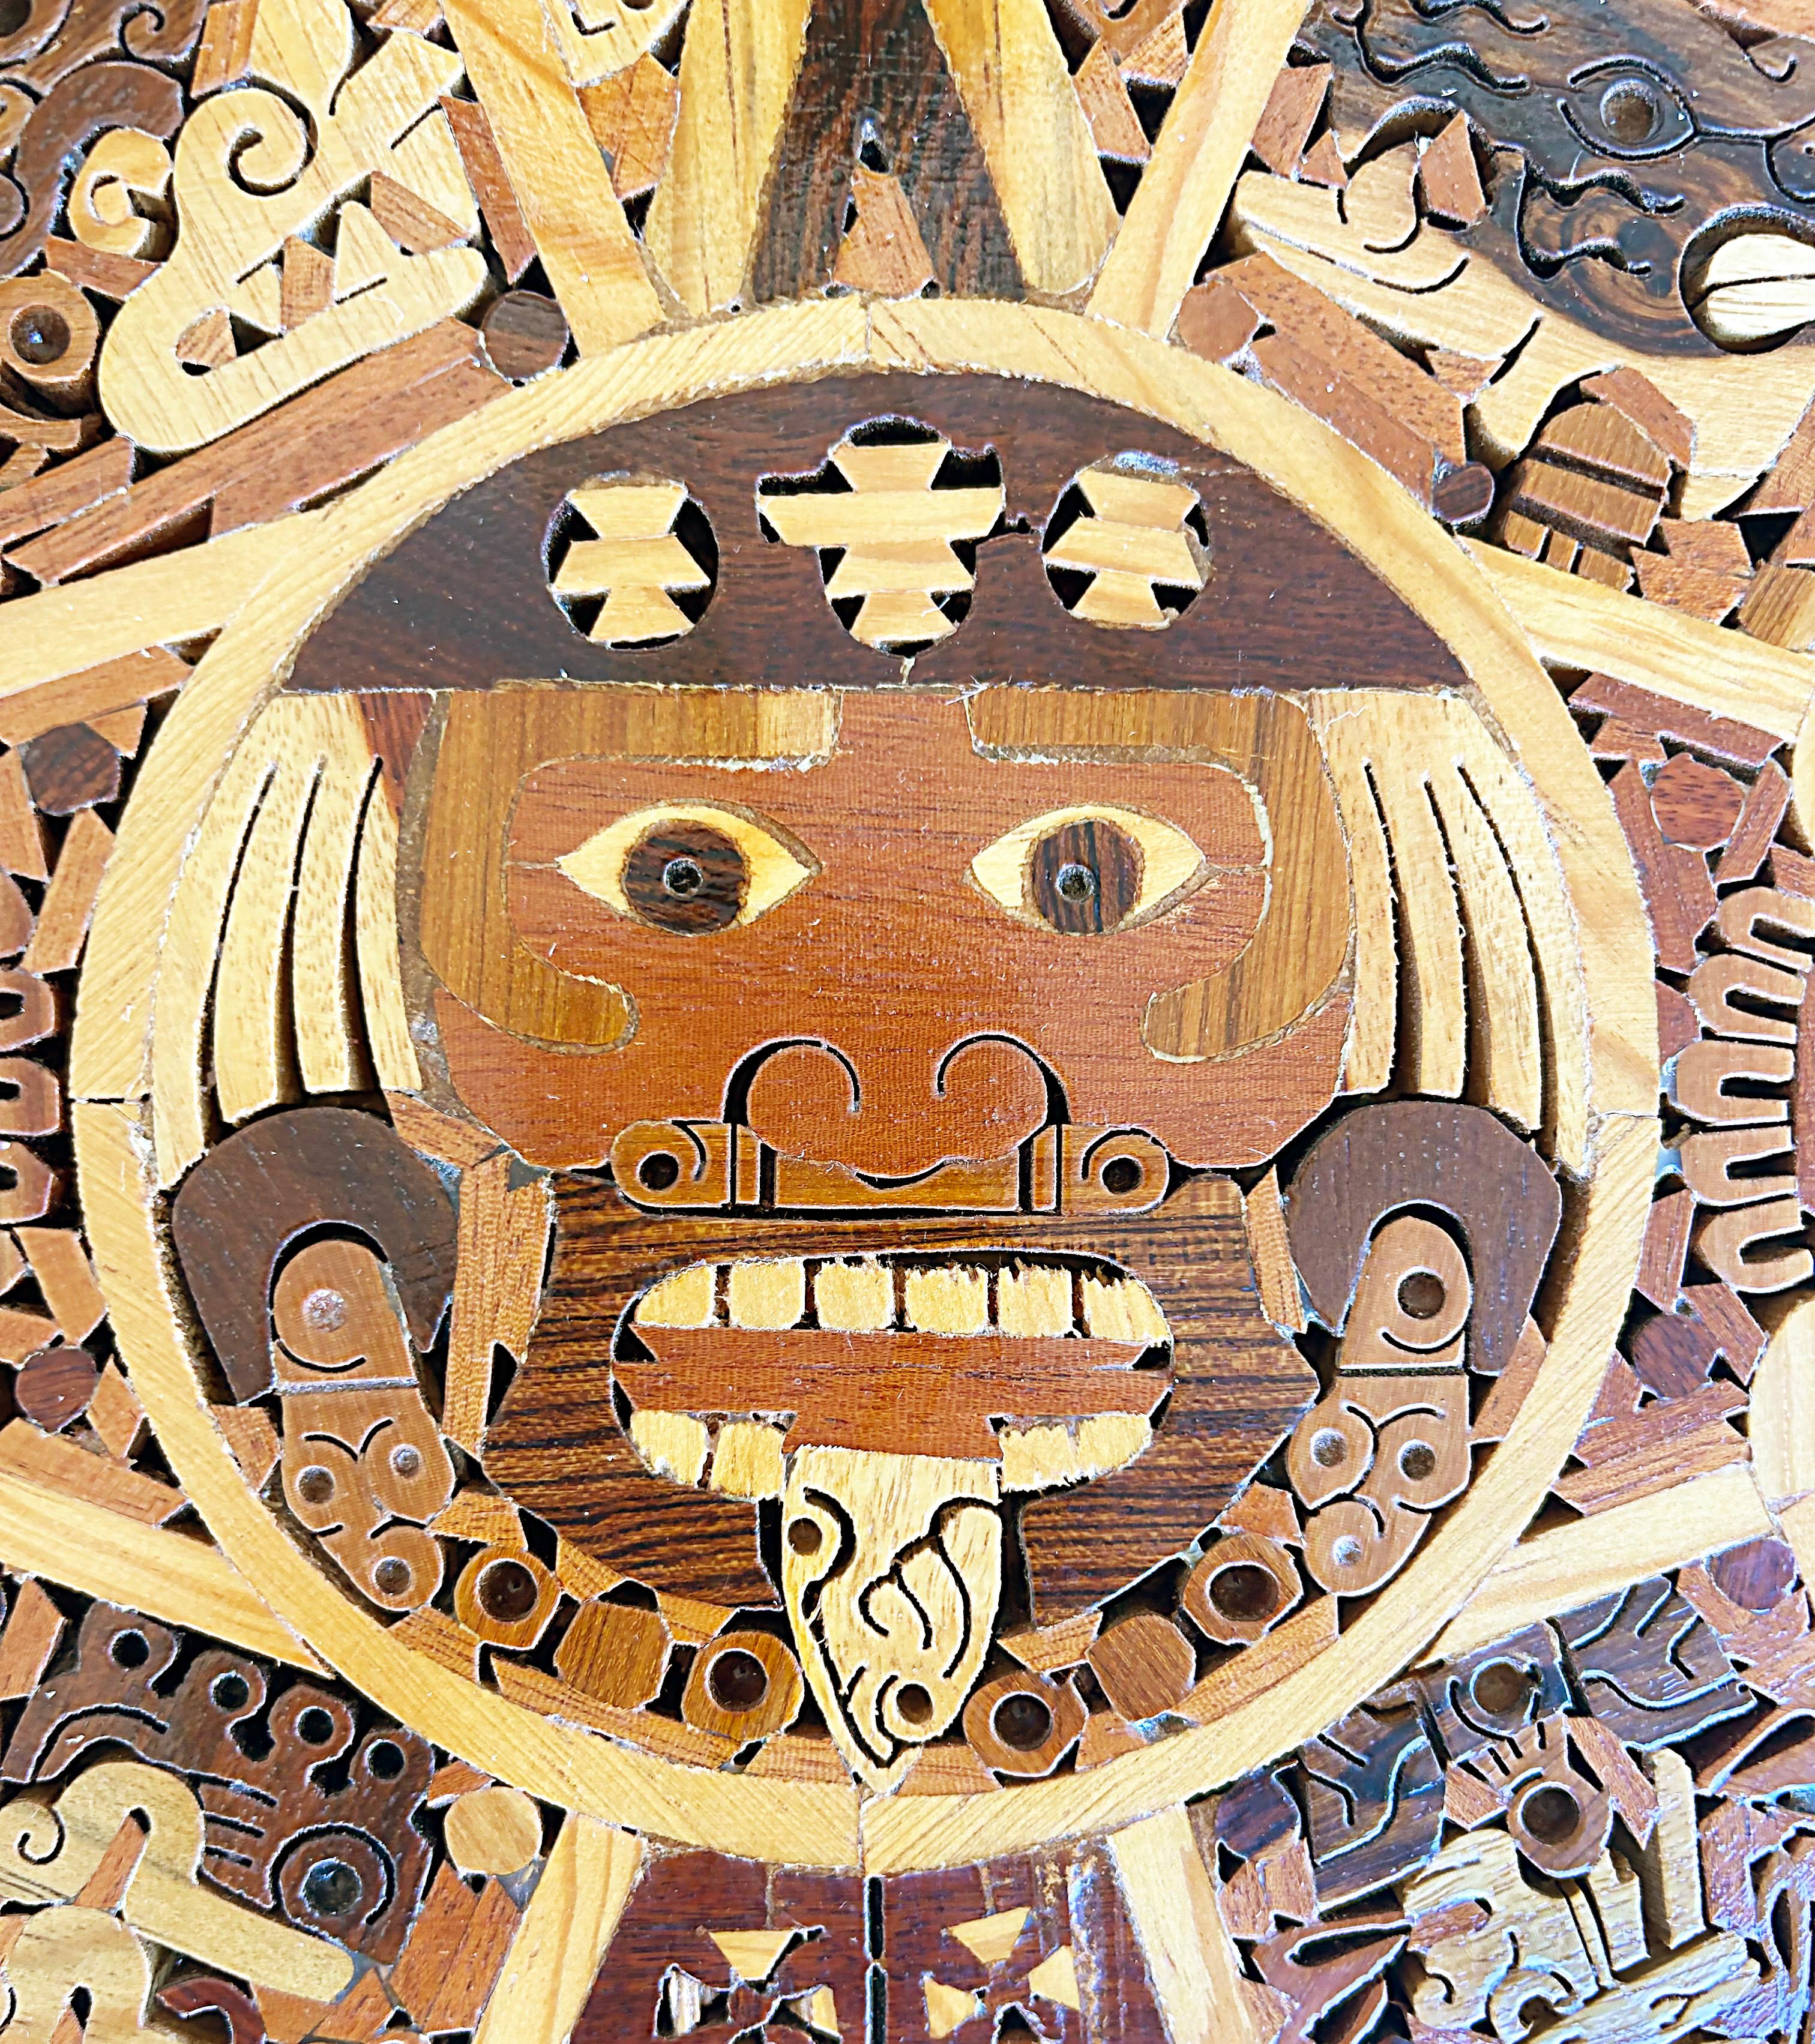 Handmade Mexican Exotic Wood Aztec Calendar Wall Sculpture- Only One Available In Good Condition For Sale In Miami, FL